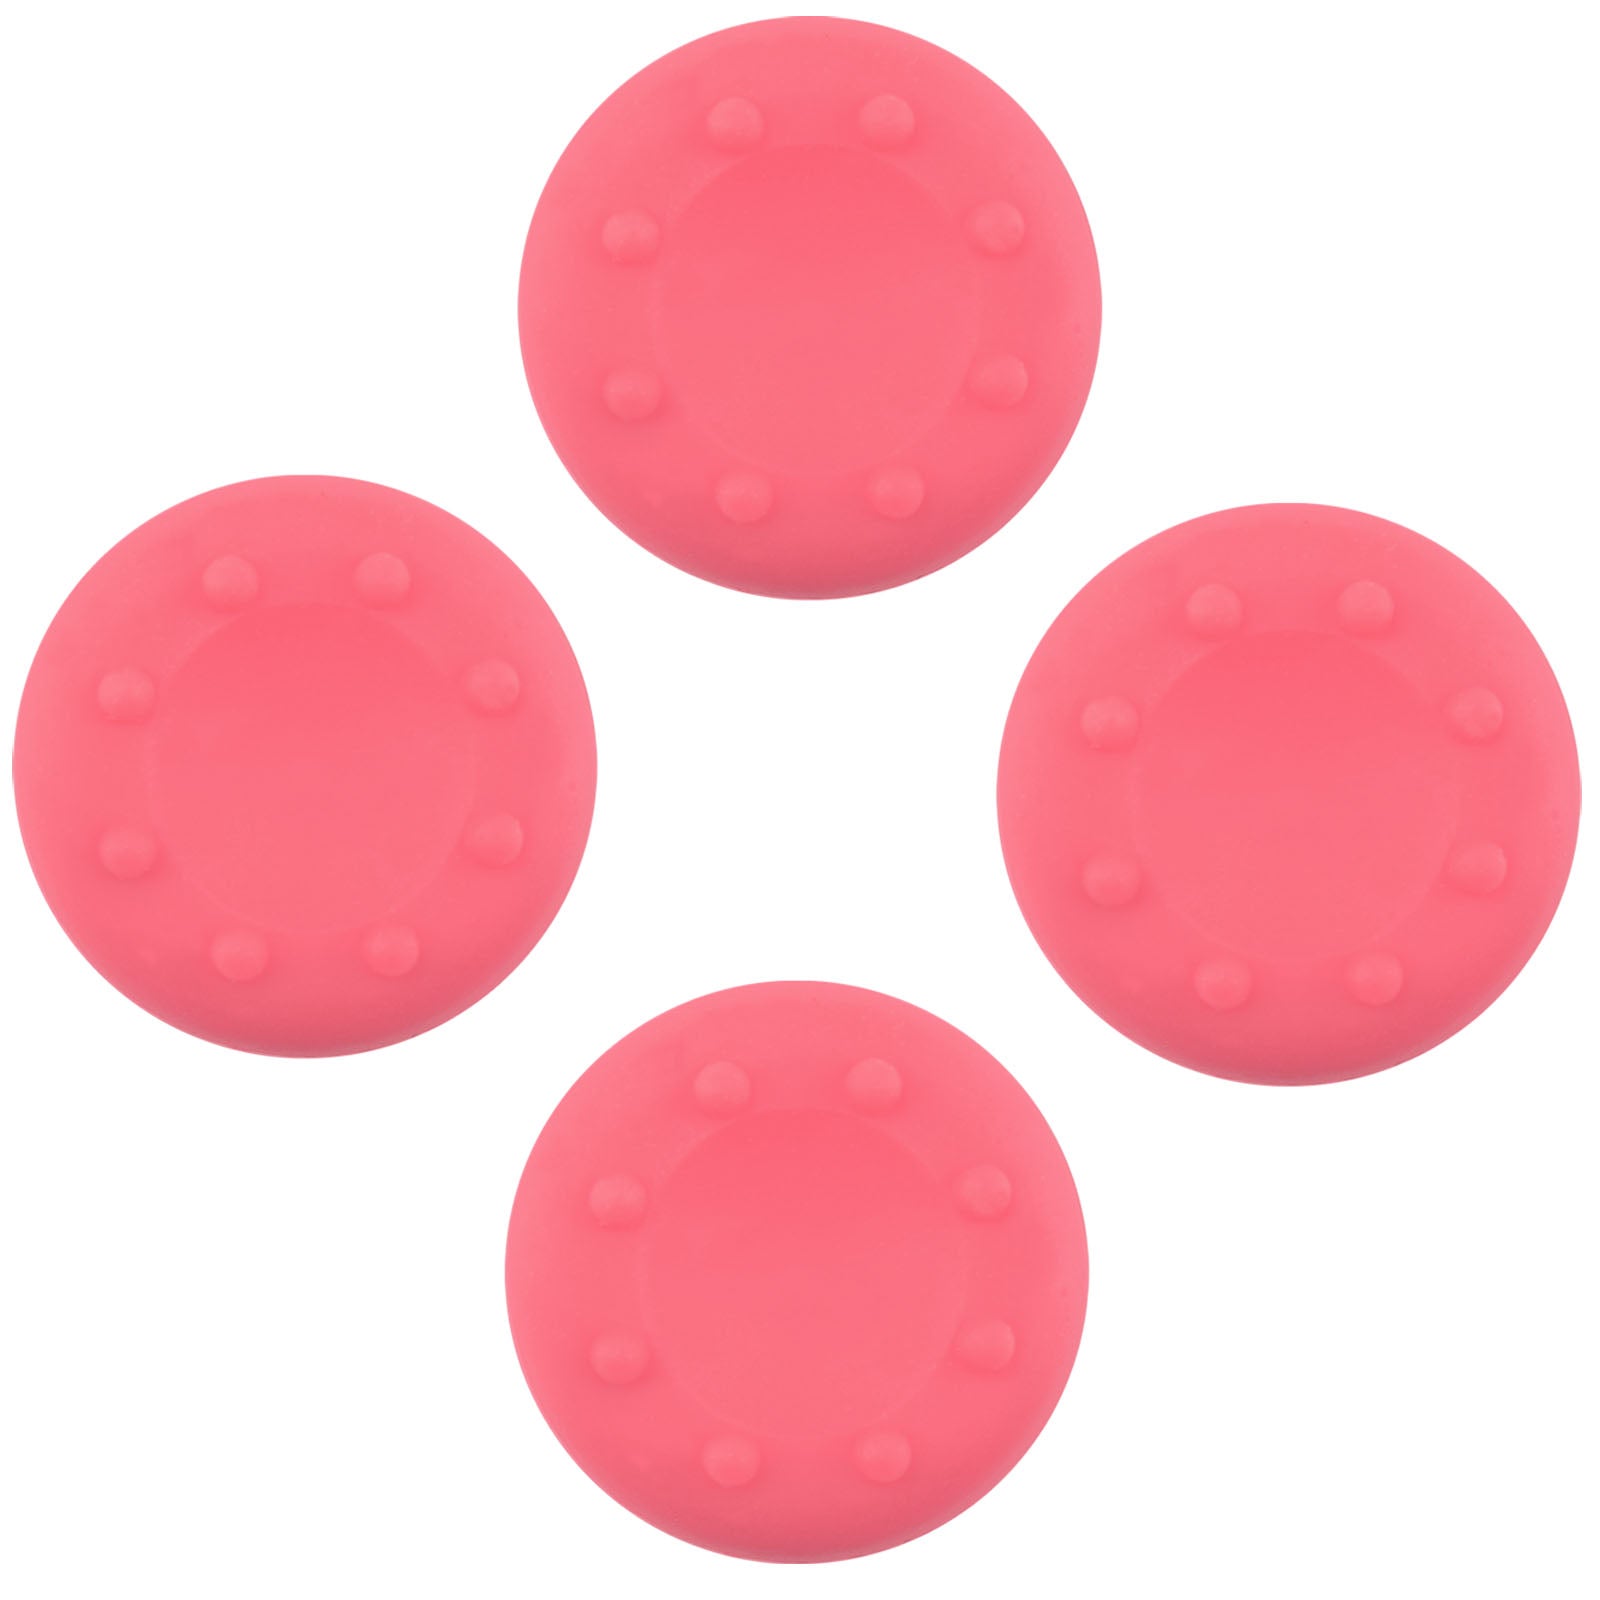 Gaming-Silicon Analog Thumb Set for XBox One 360/ PS3 & PS4 Controller Pink